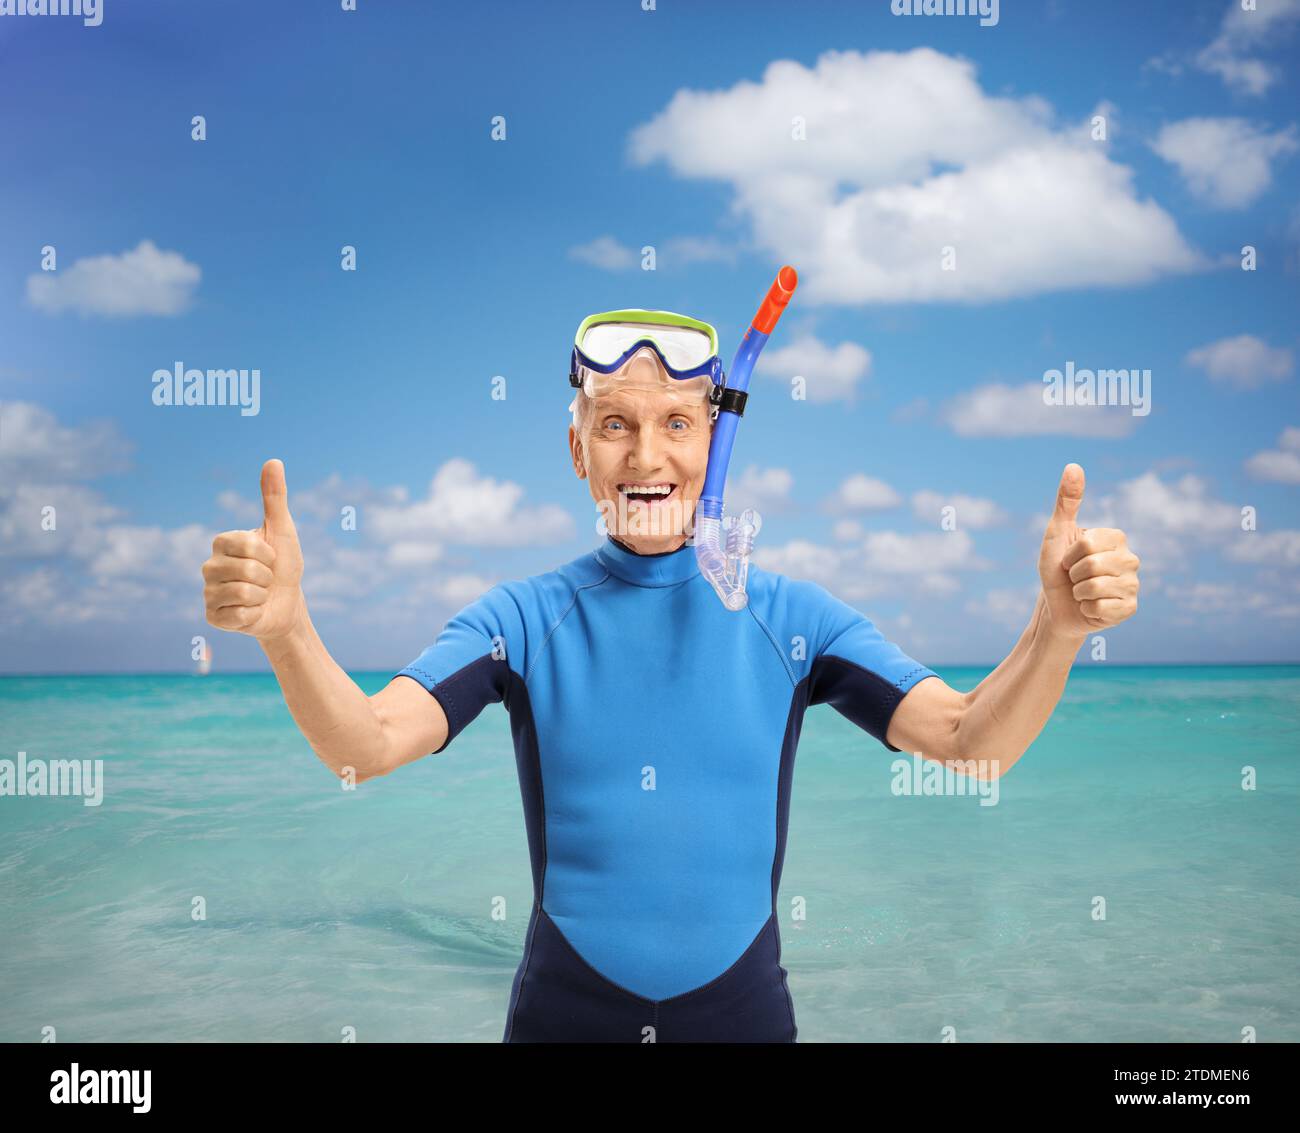 Cheerful senior man with snorkeling equipment wearing a wetsuit and making thumbs up sign in front of a sea Stock Photo